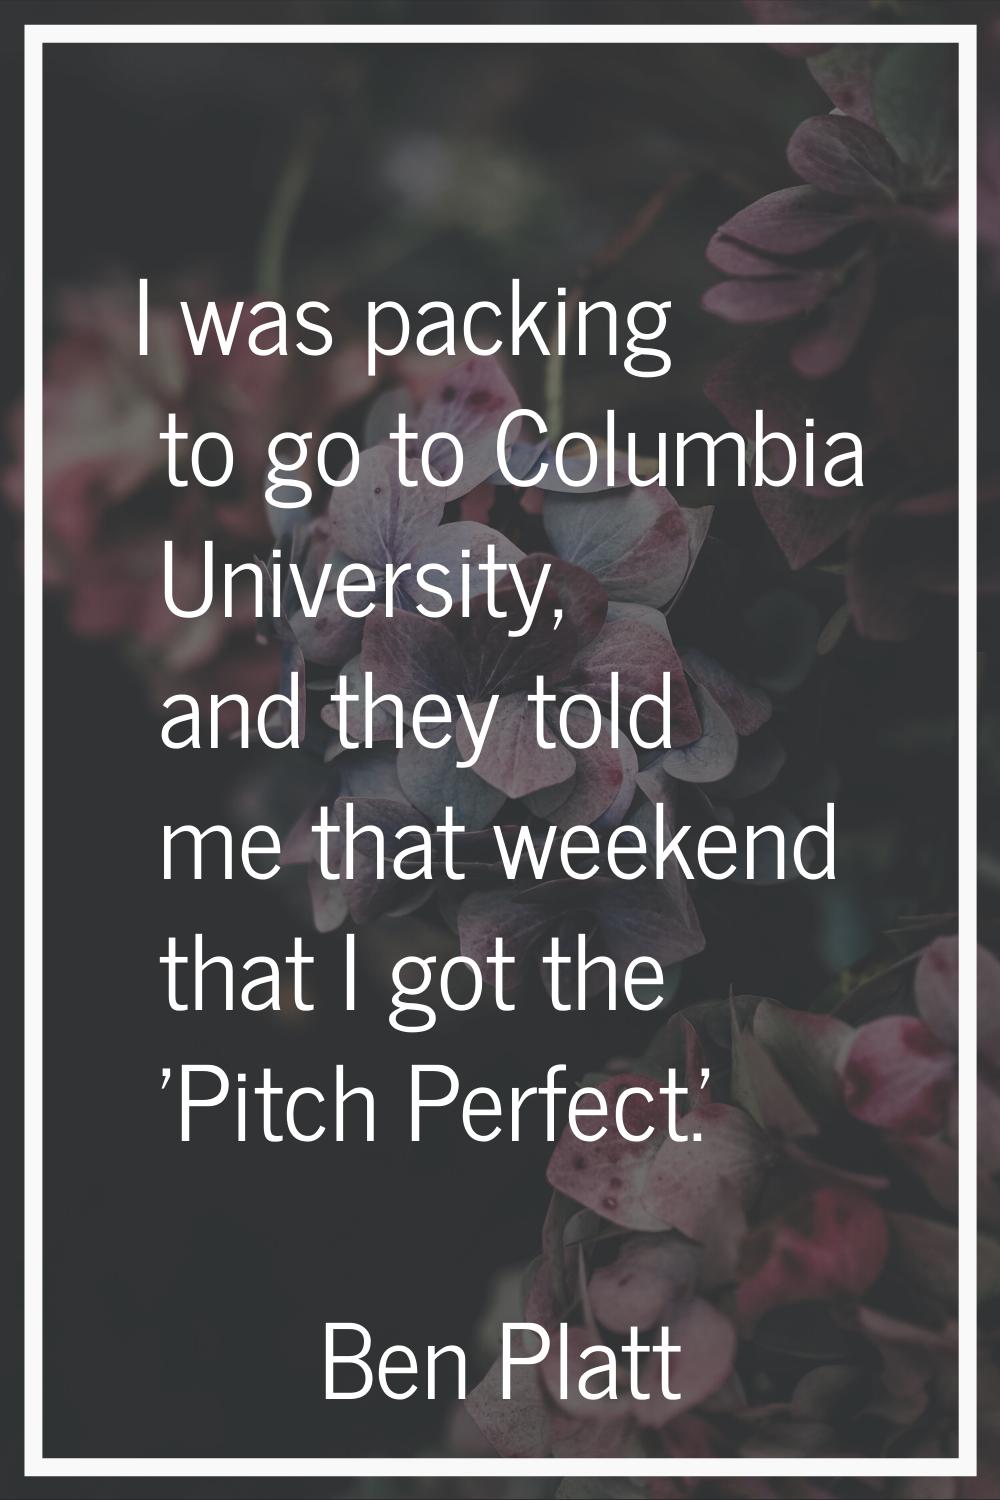 I was packing to go to Columbia University, and they told me that weekend that I got the 'Pitch Per